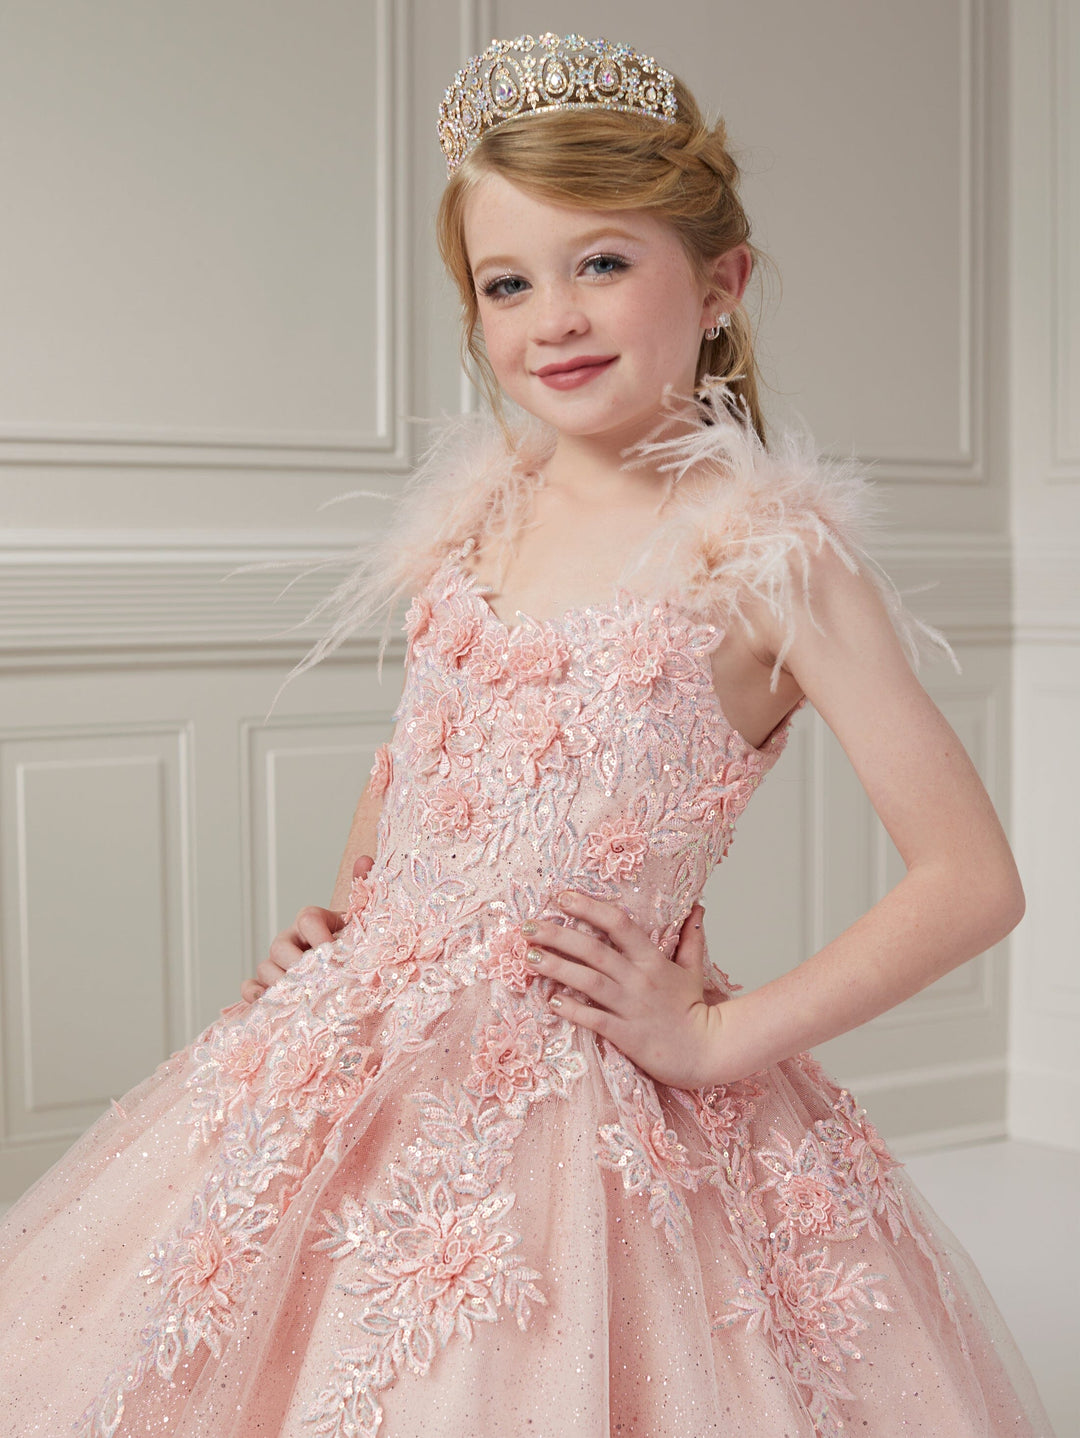 Girls Sleeveless Feather Gown by Tiffany Princess 13727